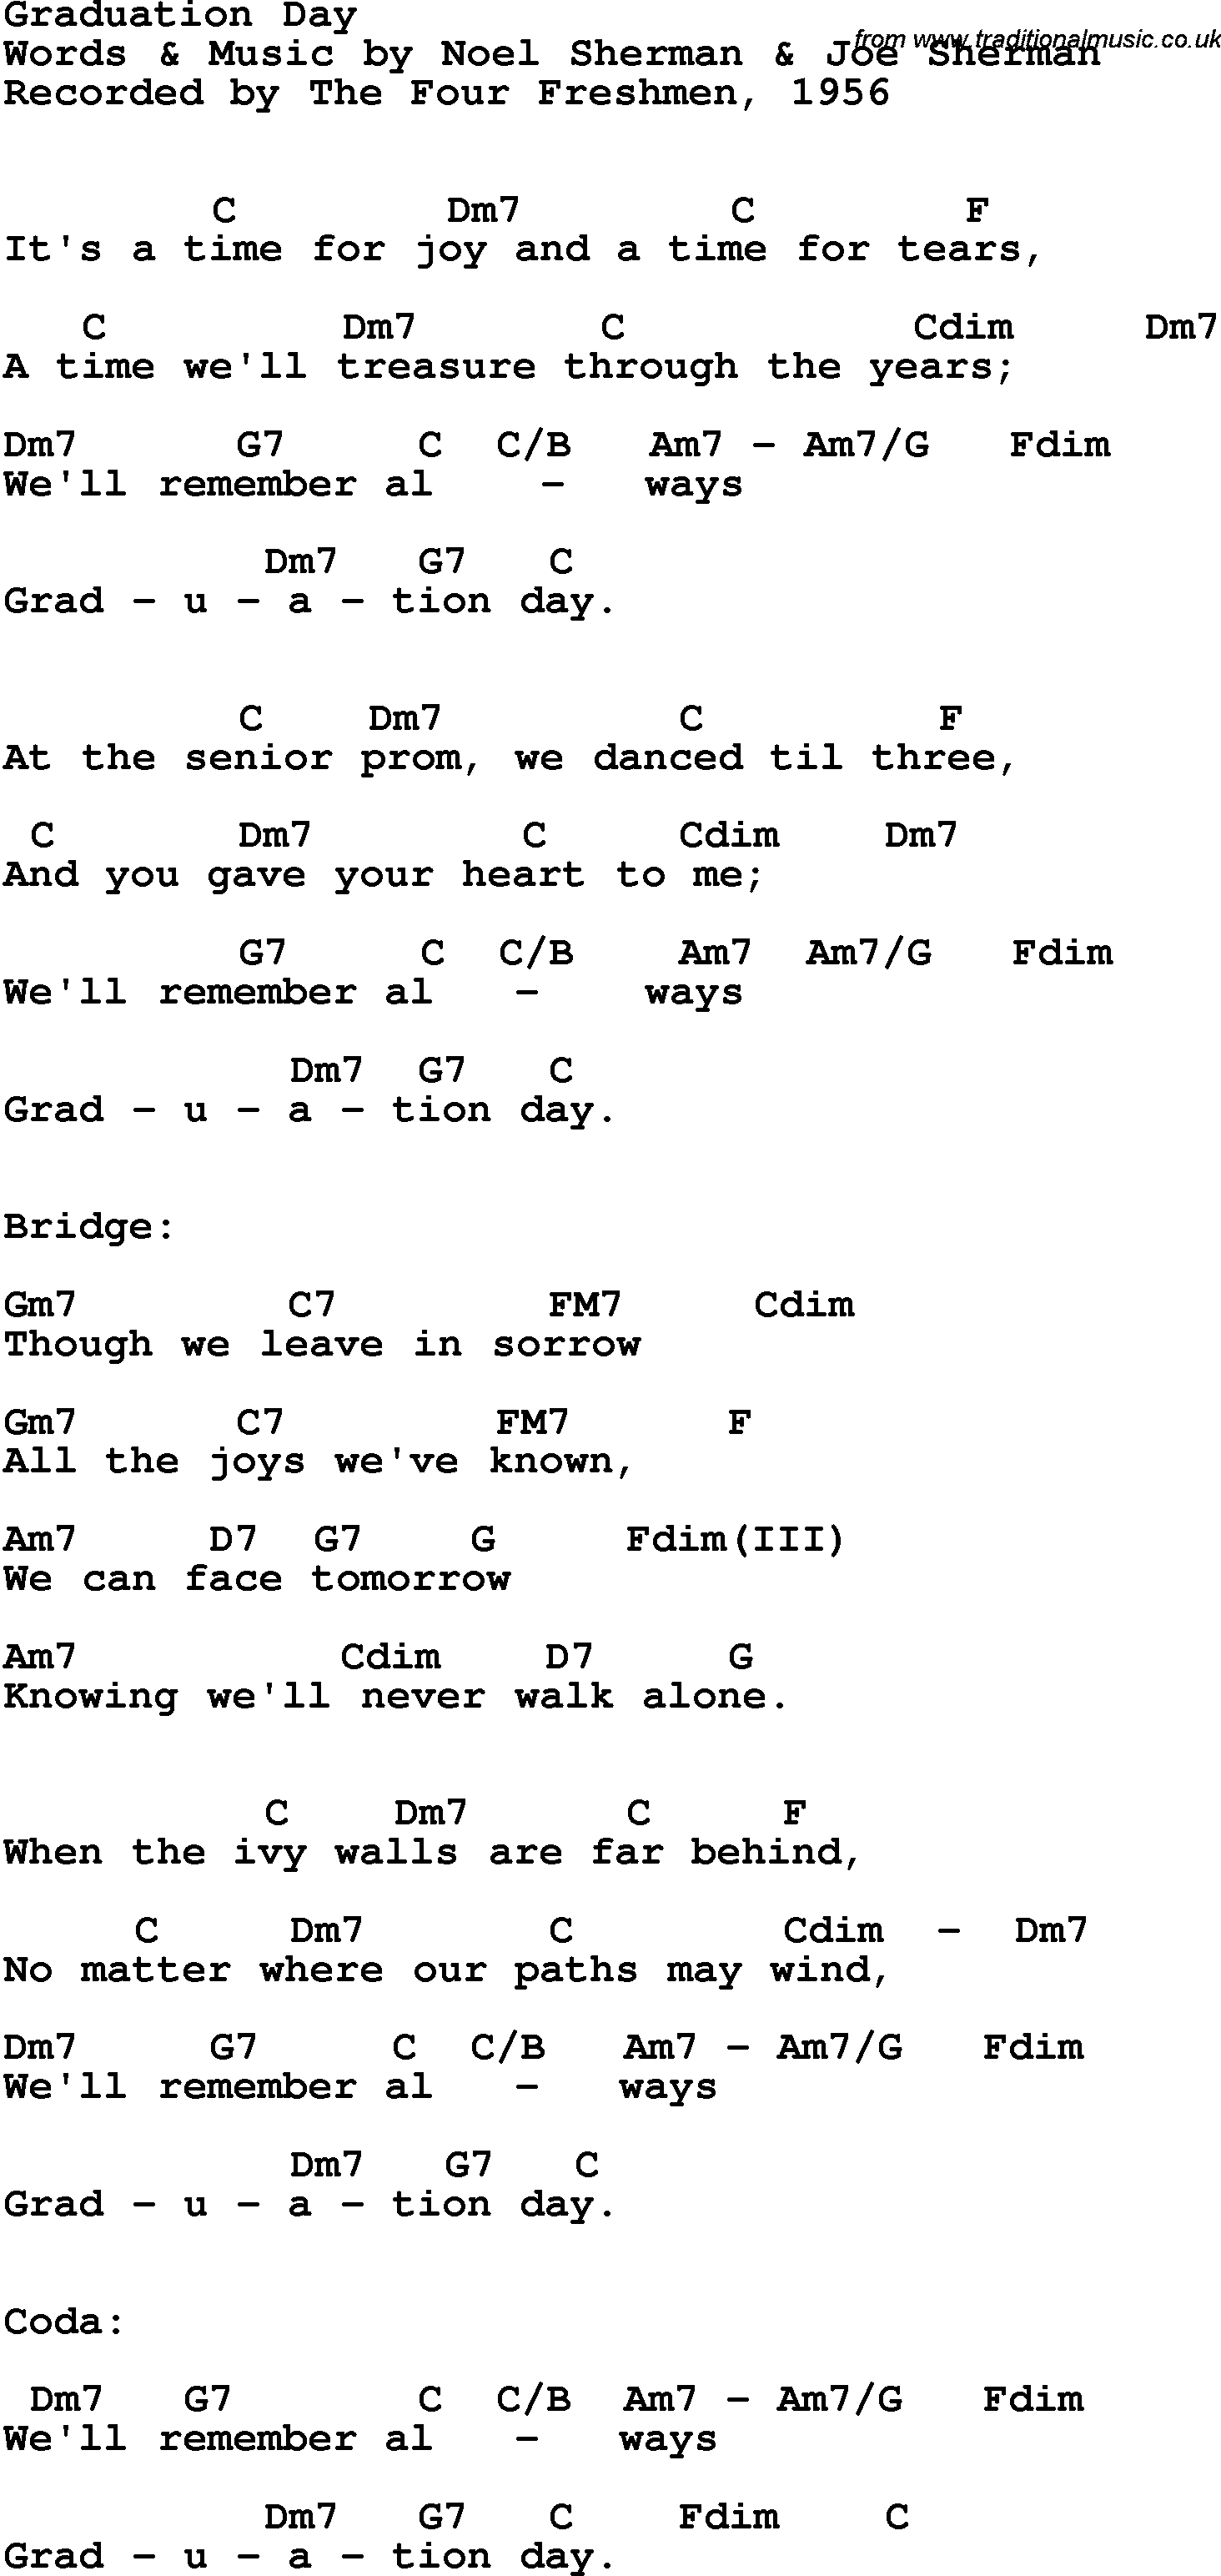 Song Lyrics with guitar chords for Graduation Day - The Four Freshmen, 1956